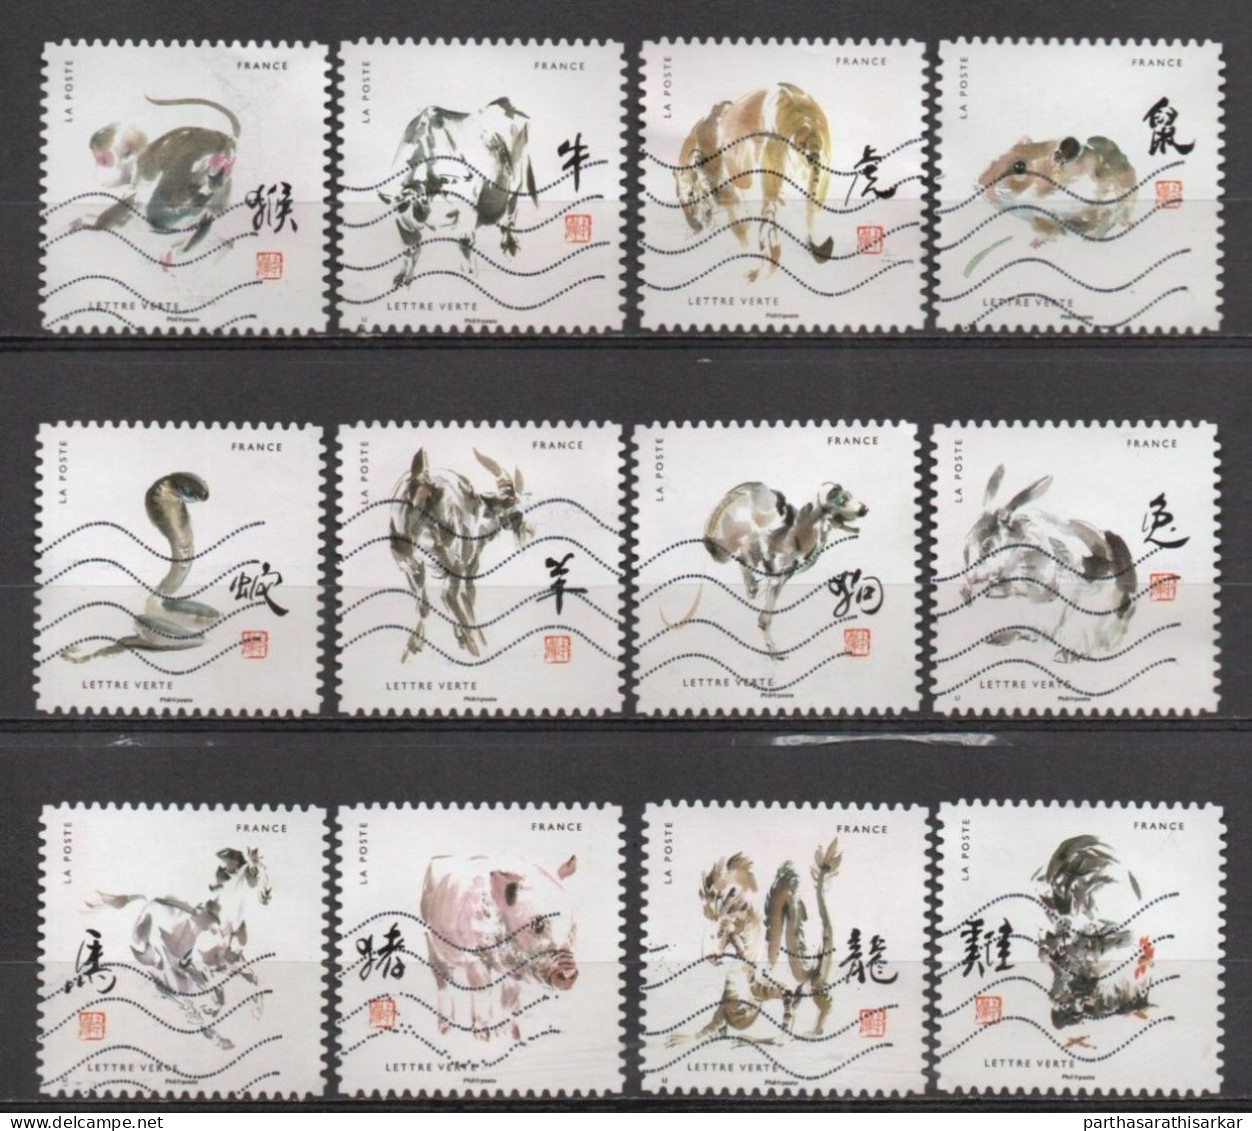 FRANCE 2017 CHINESE ZODIAC SIGNS COMPLETE SET USED RARE - Gebraucht